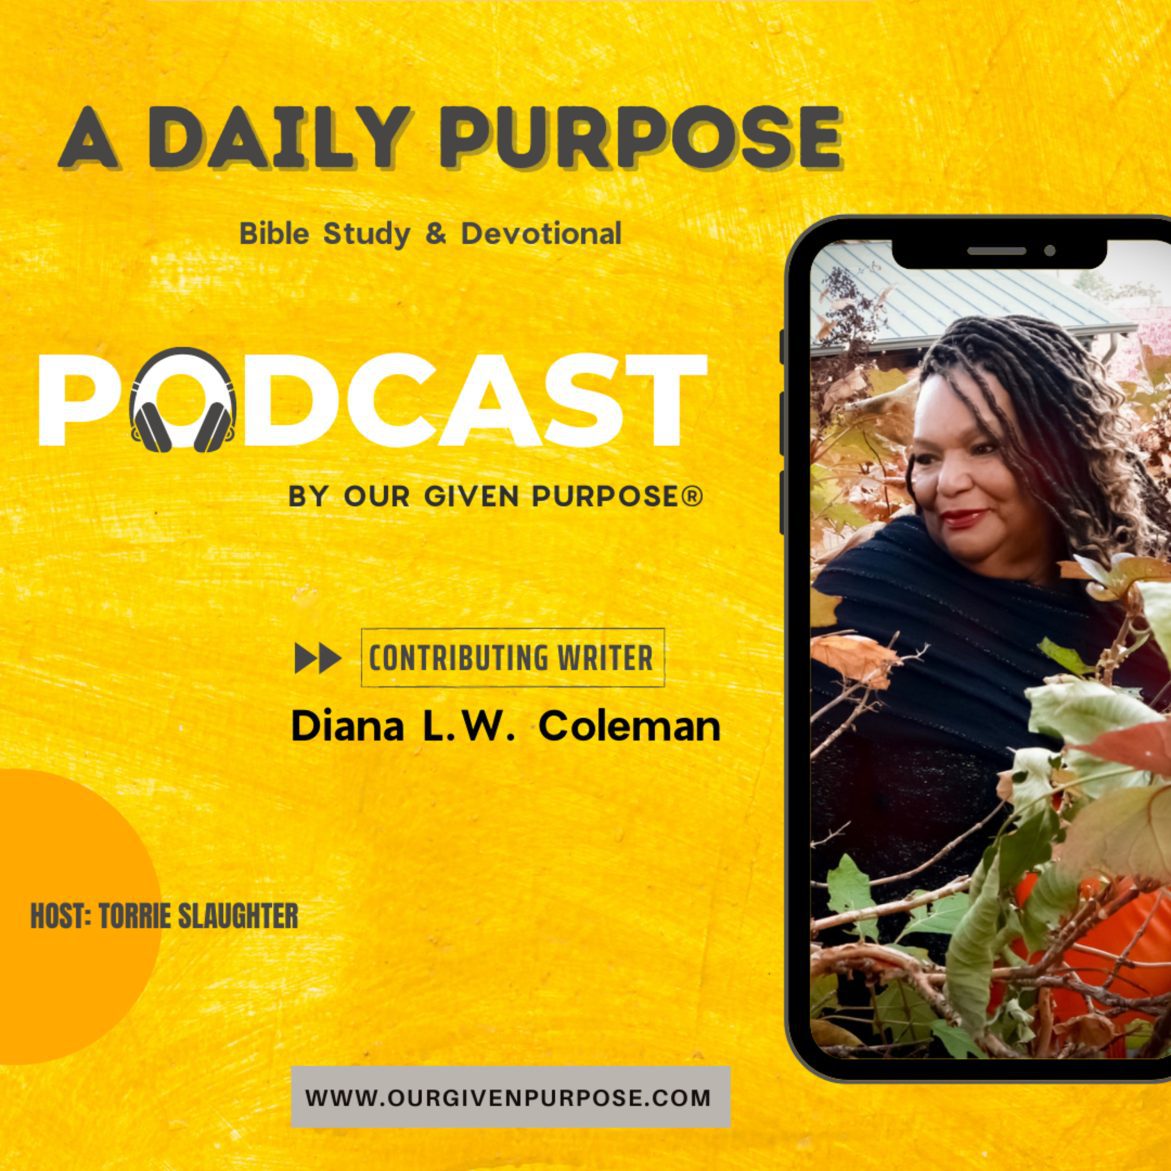 Black Podcasting - Day 73 IN WHAT TONGUES DO YOU SPEAK? by Diana L.W. Coleman